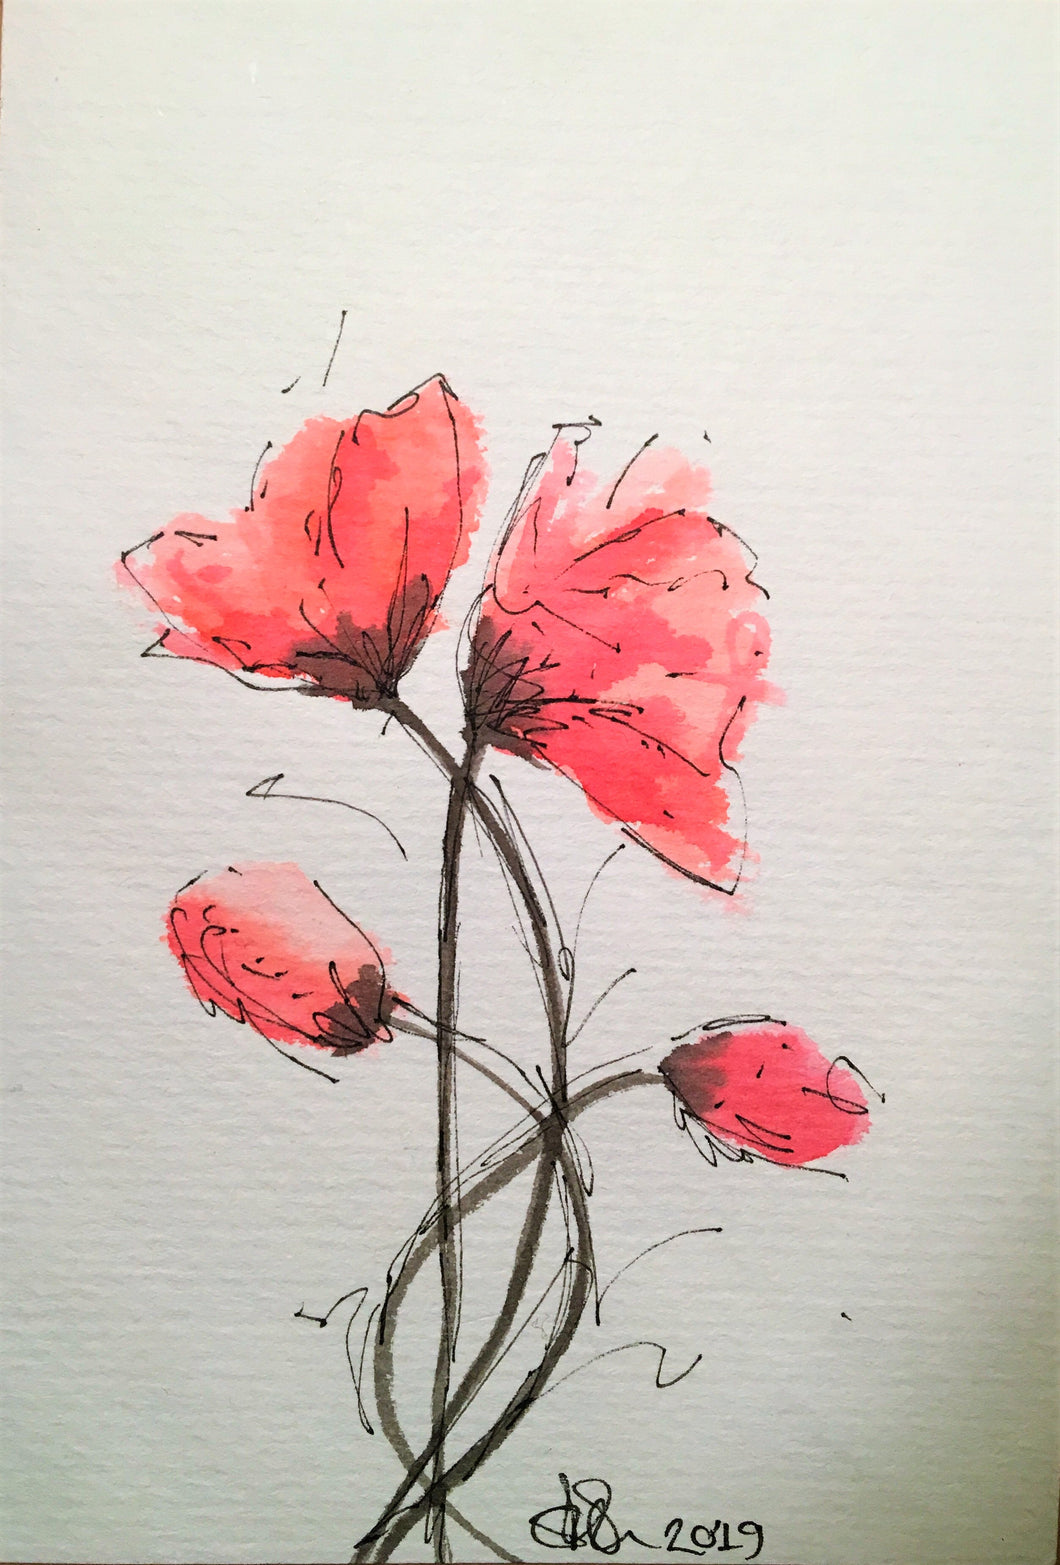 Handpainted Watercolour Greeting Card - Red Poppies and Buds Design - eDgE dEsiGn London